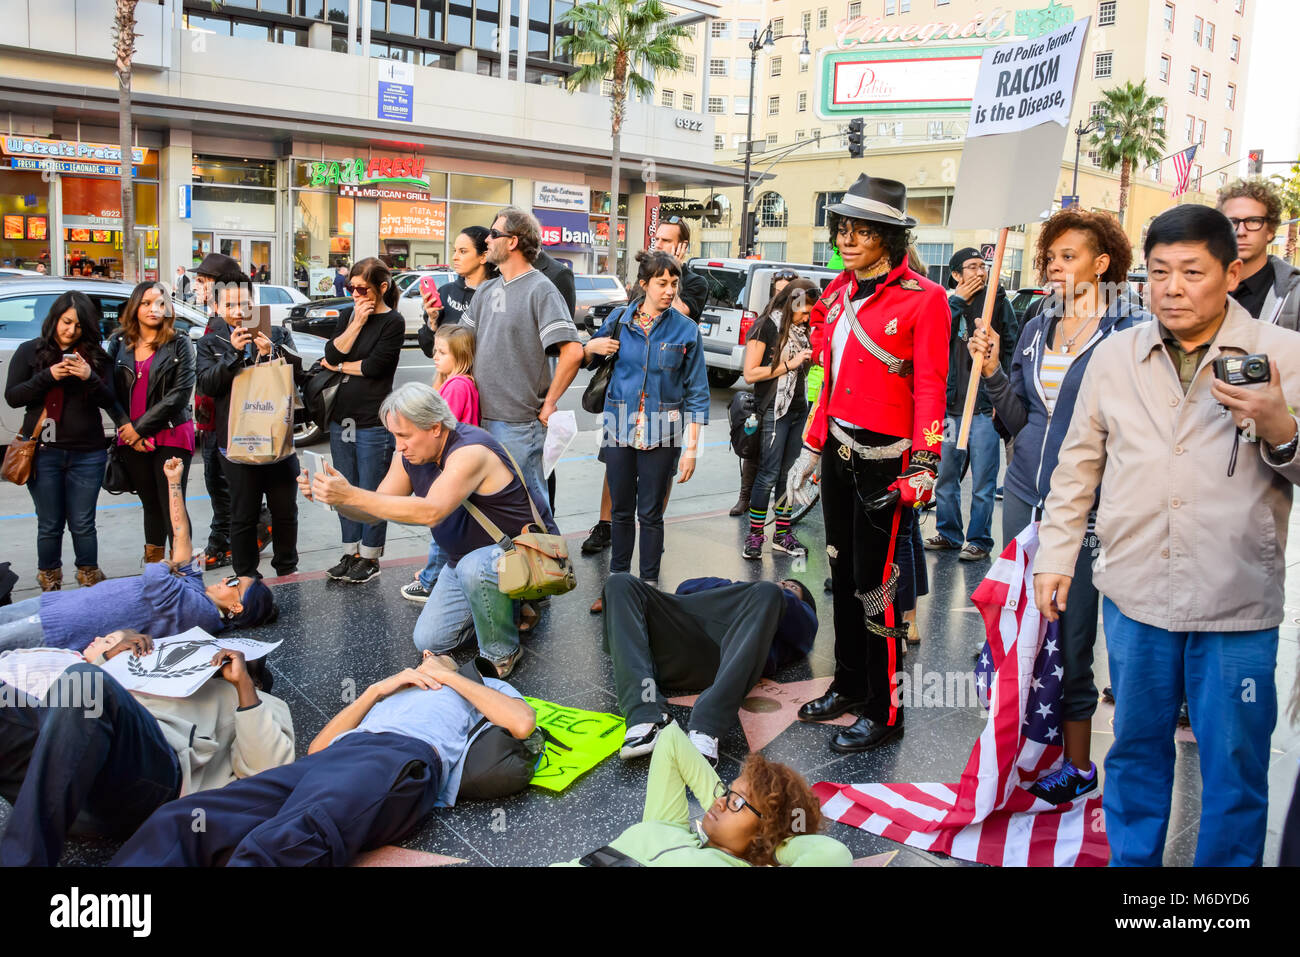 Protest Demonstration, Black Lives Matter, Hands Up Don't Shoot, Hollywood Walk of Fame, L.A., Califronia Stock Photo